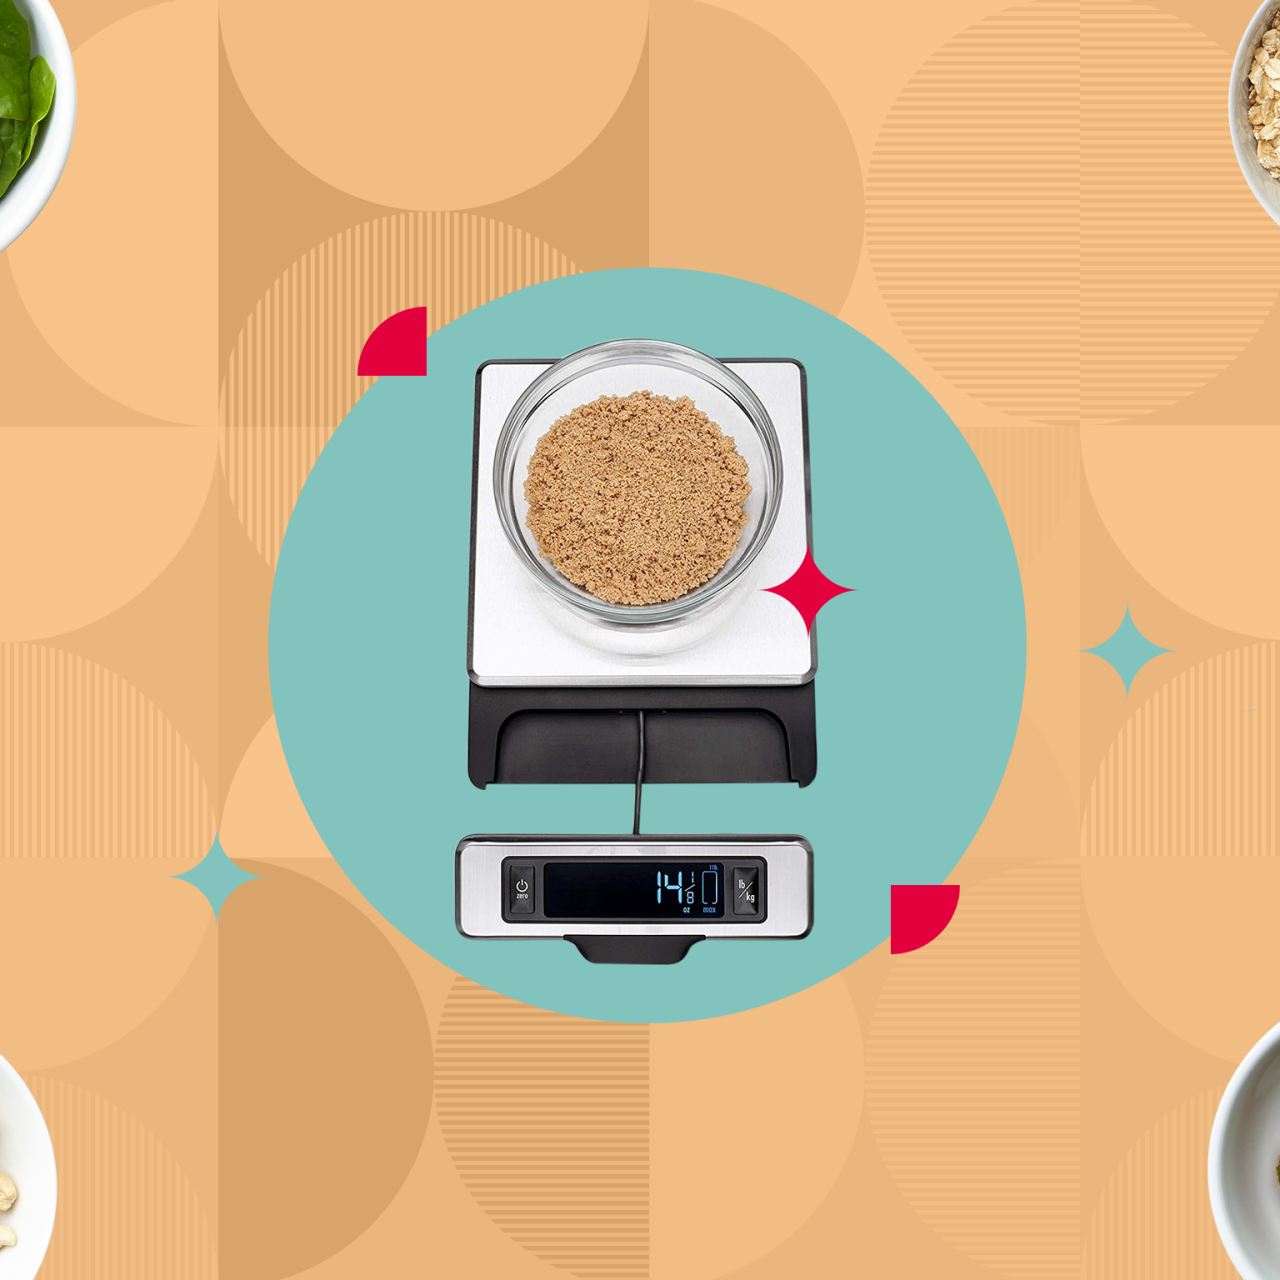 4 Reasons a Food Scale Belongs in Every Kitchen (and How to Use One)